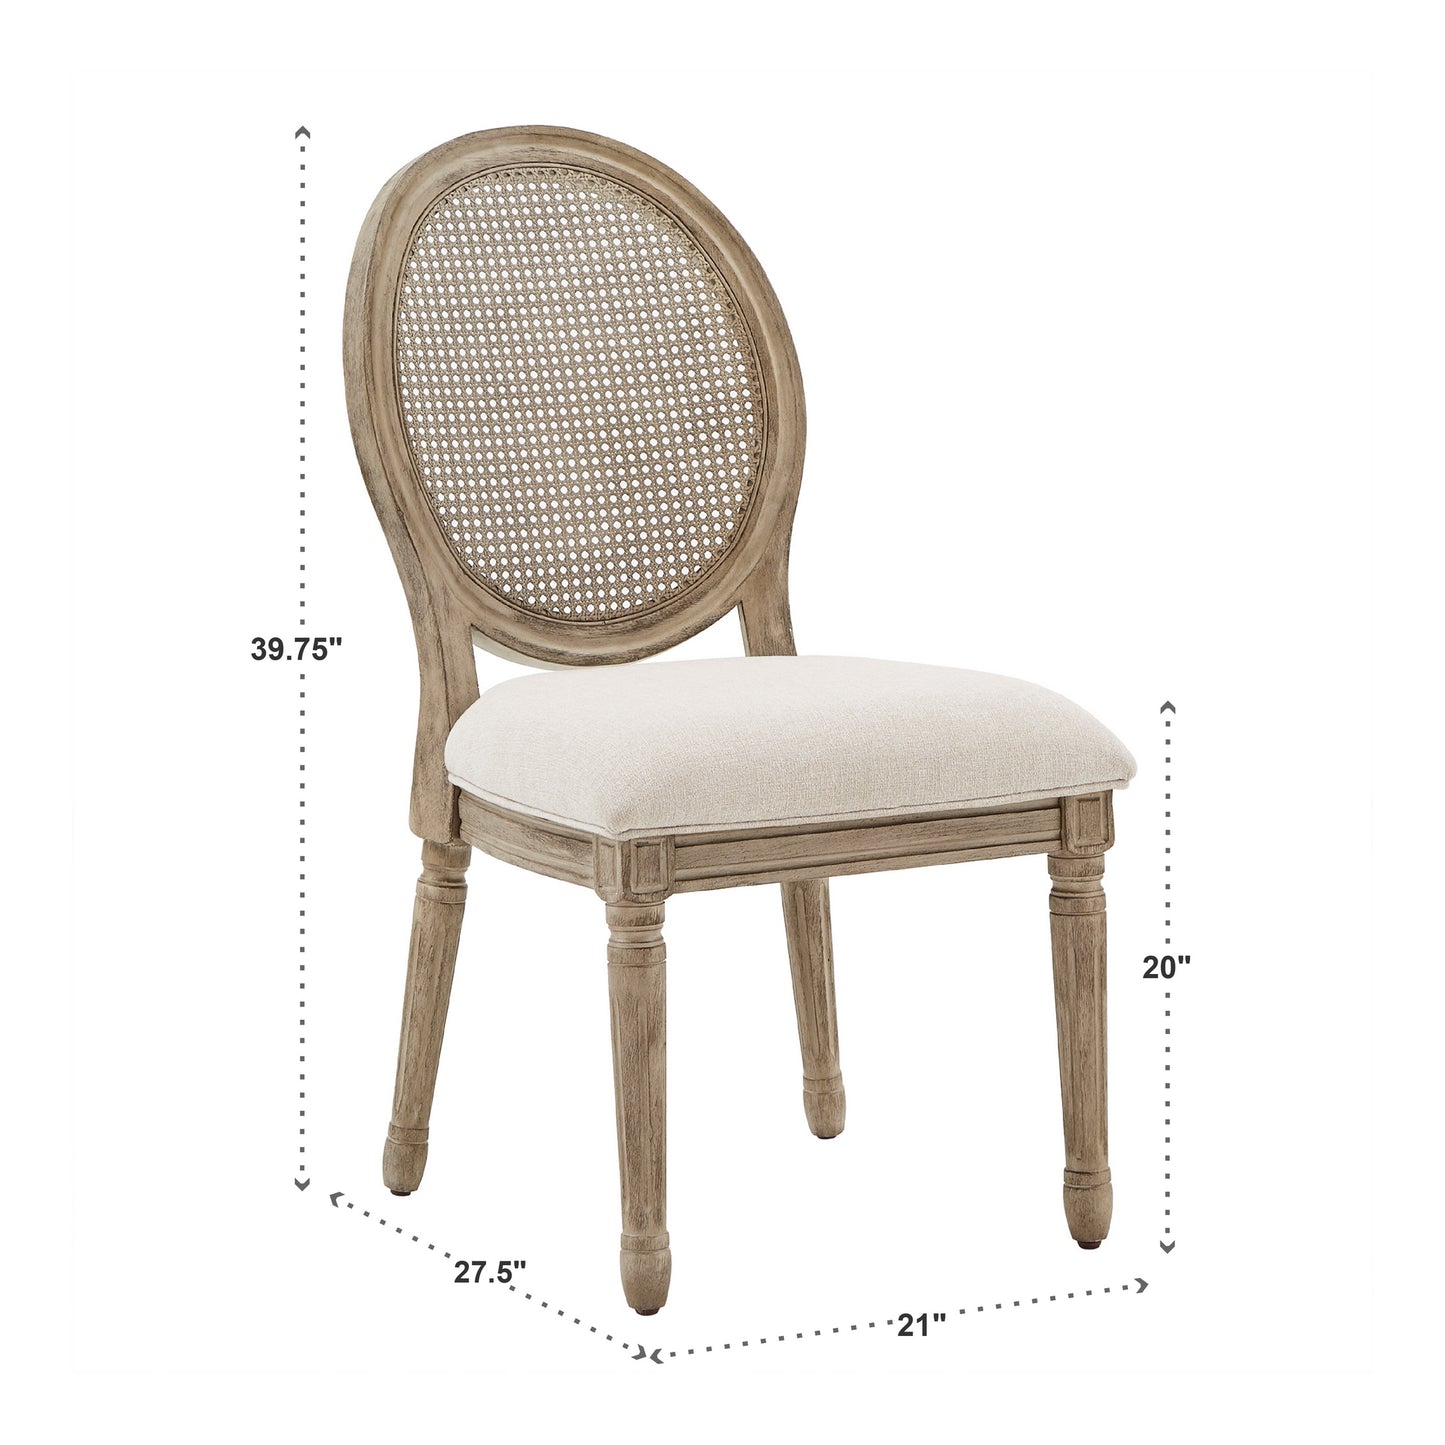 Round Linen and Wood Dining Chairs (Set of 2) - Cane Back, Antique Grey Oak Finish, Beige